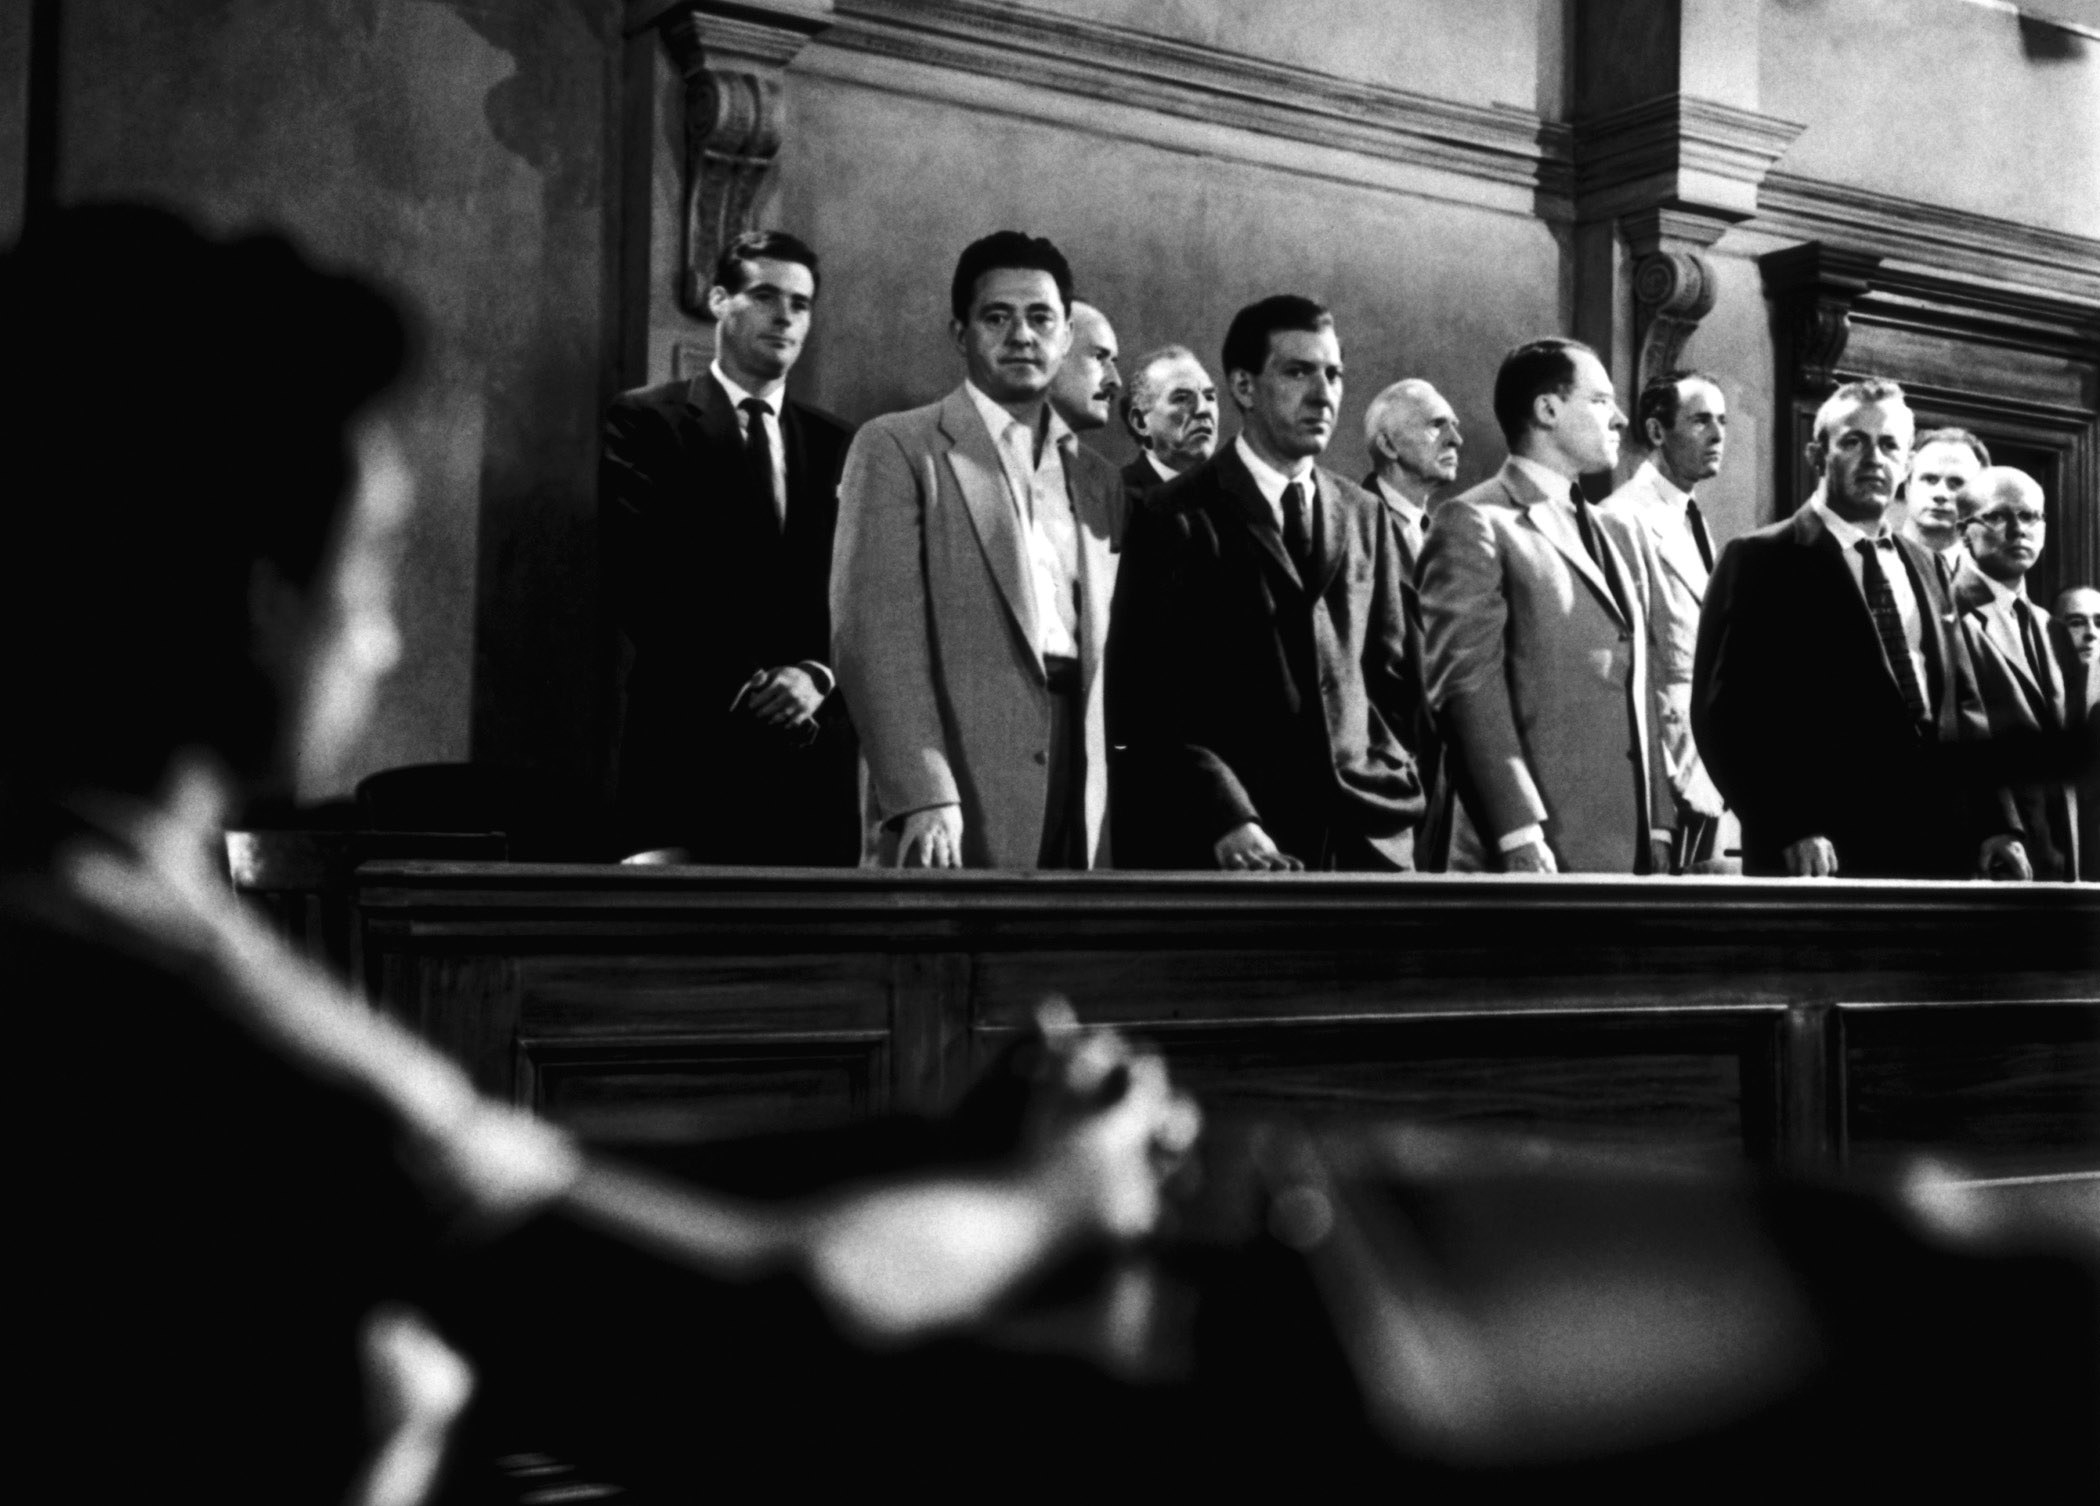 jury in a courtroom